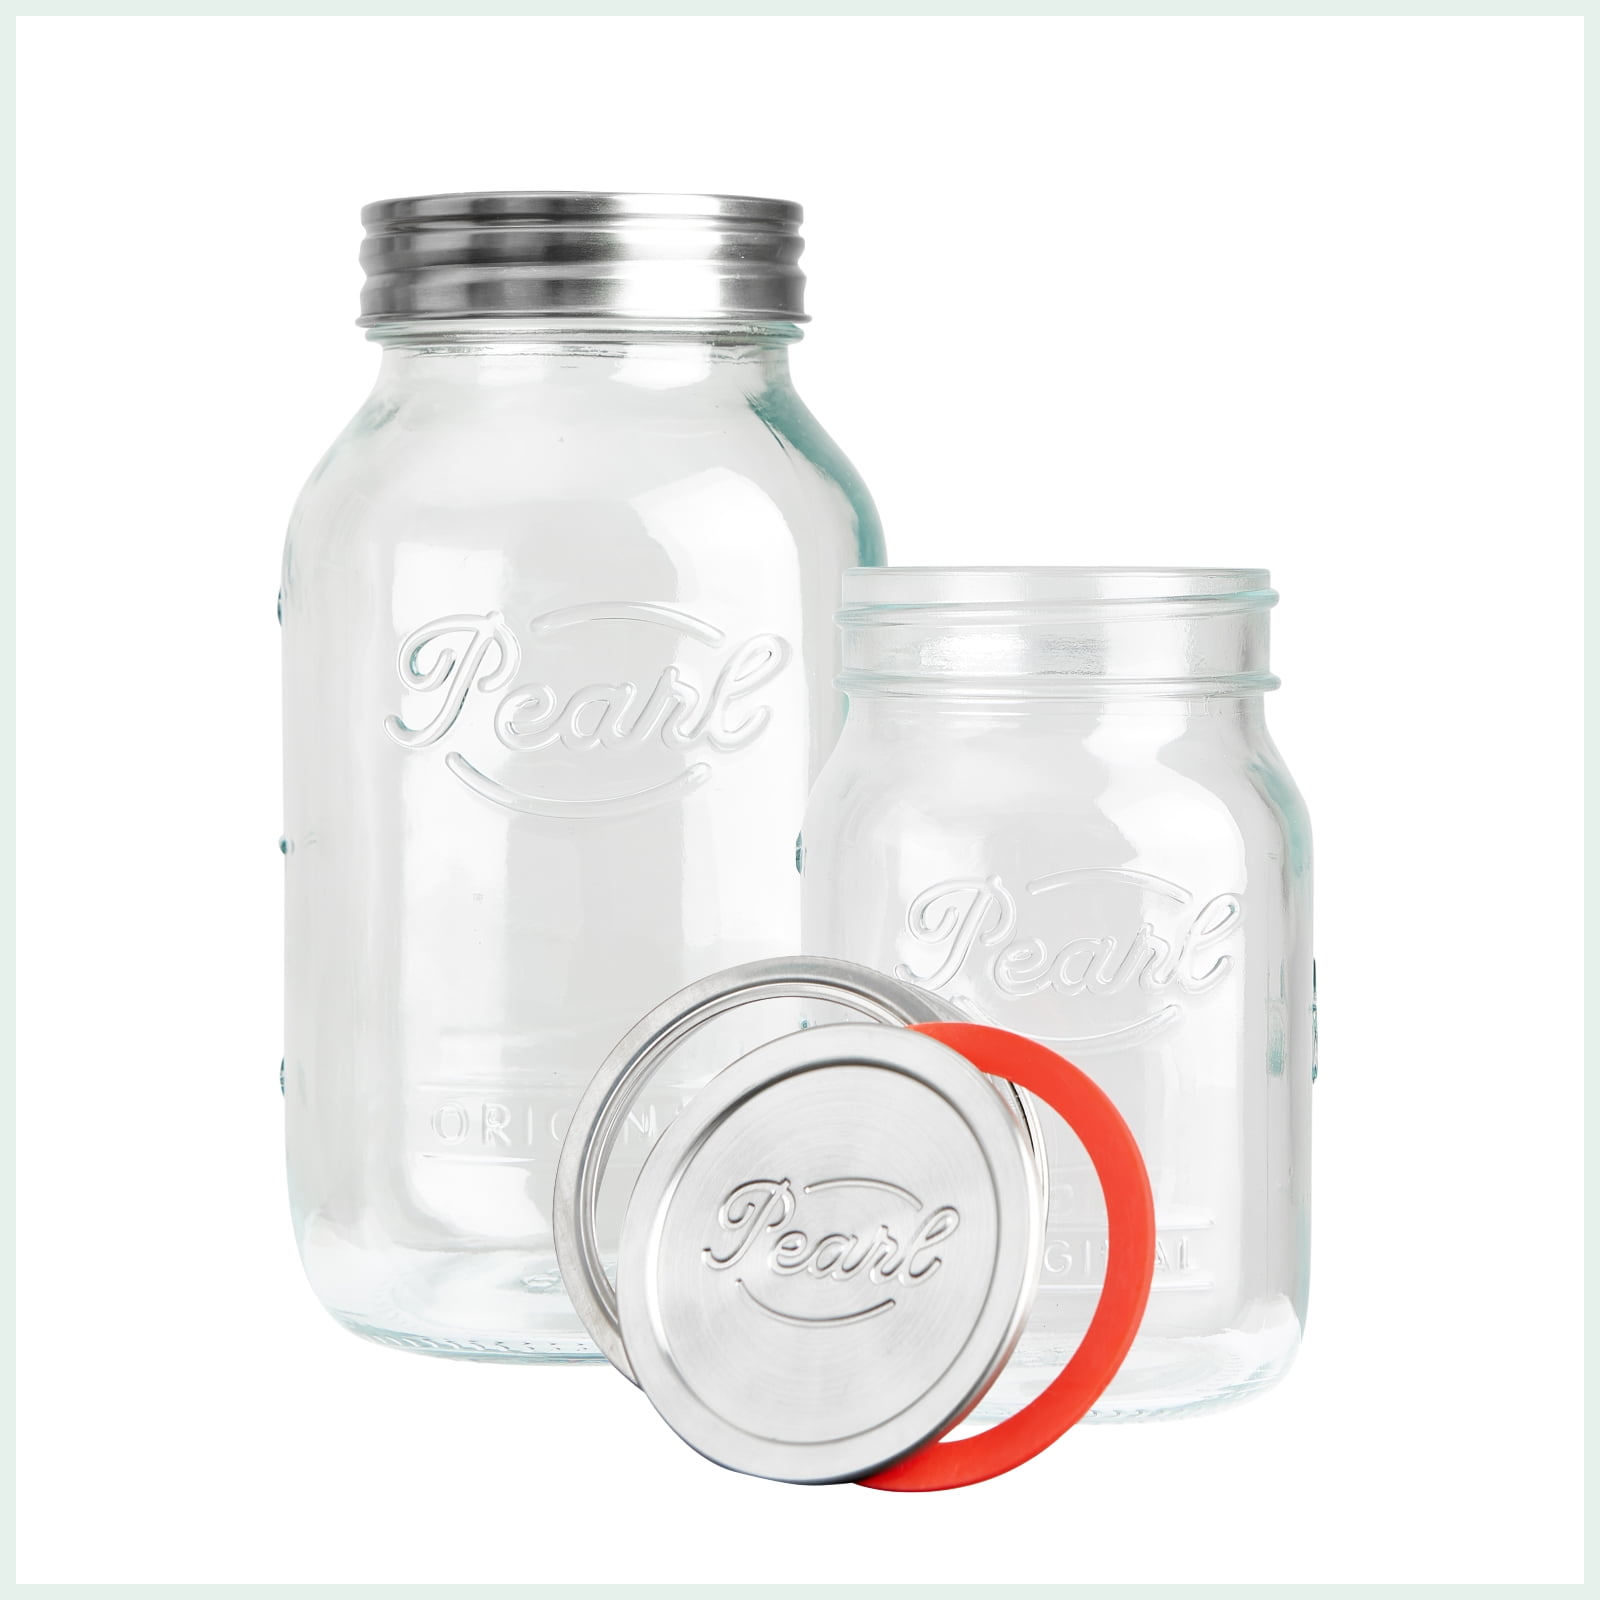 Pearl Luna preserving and canning jars